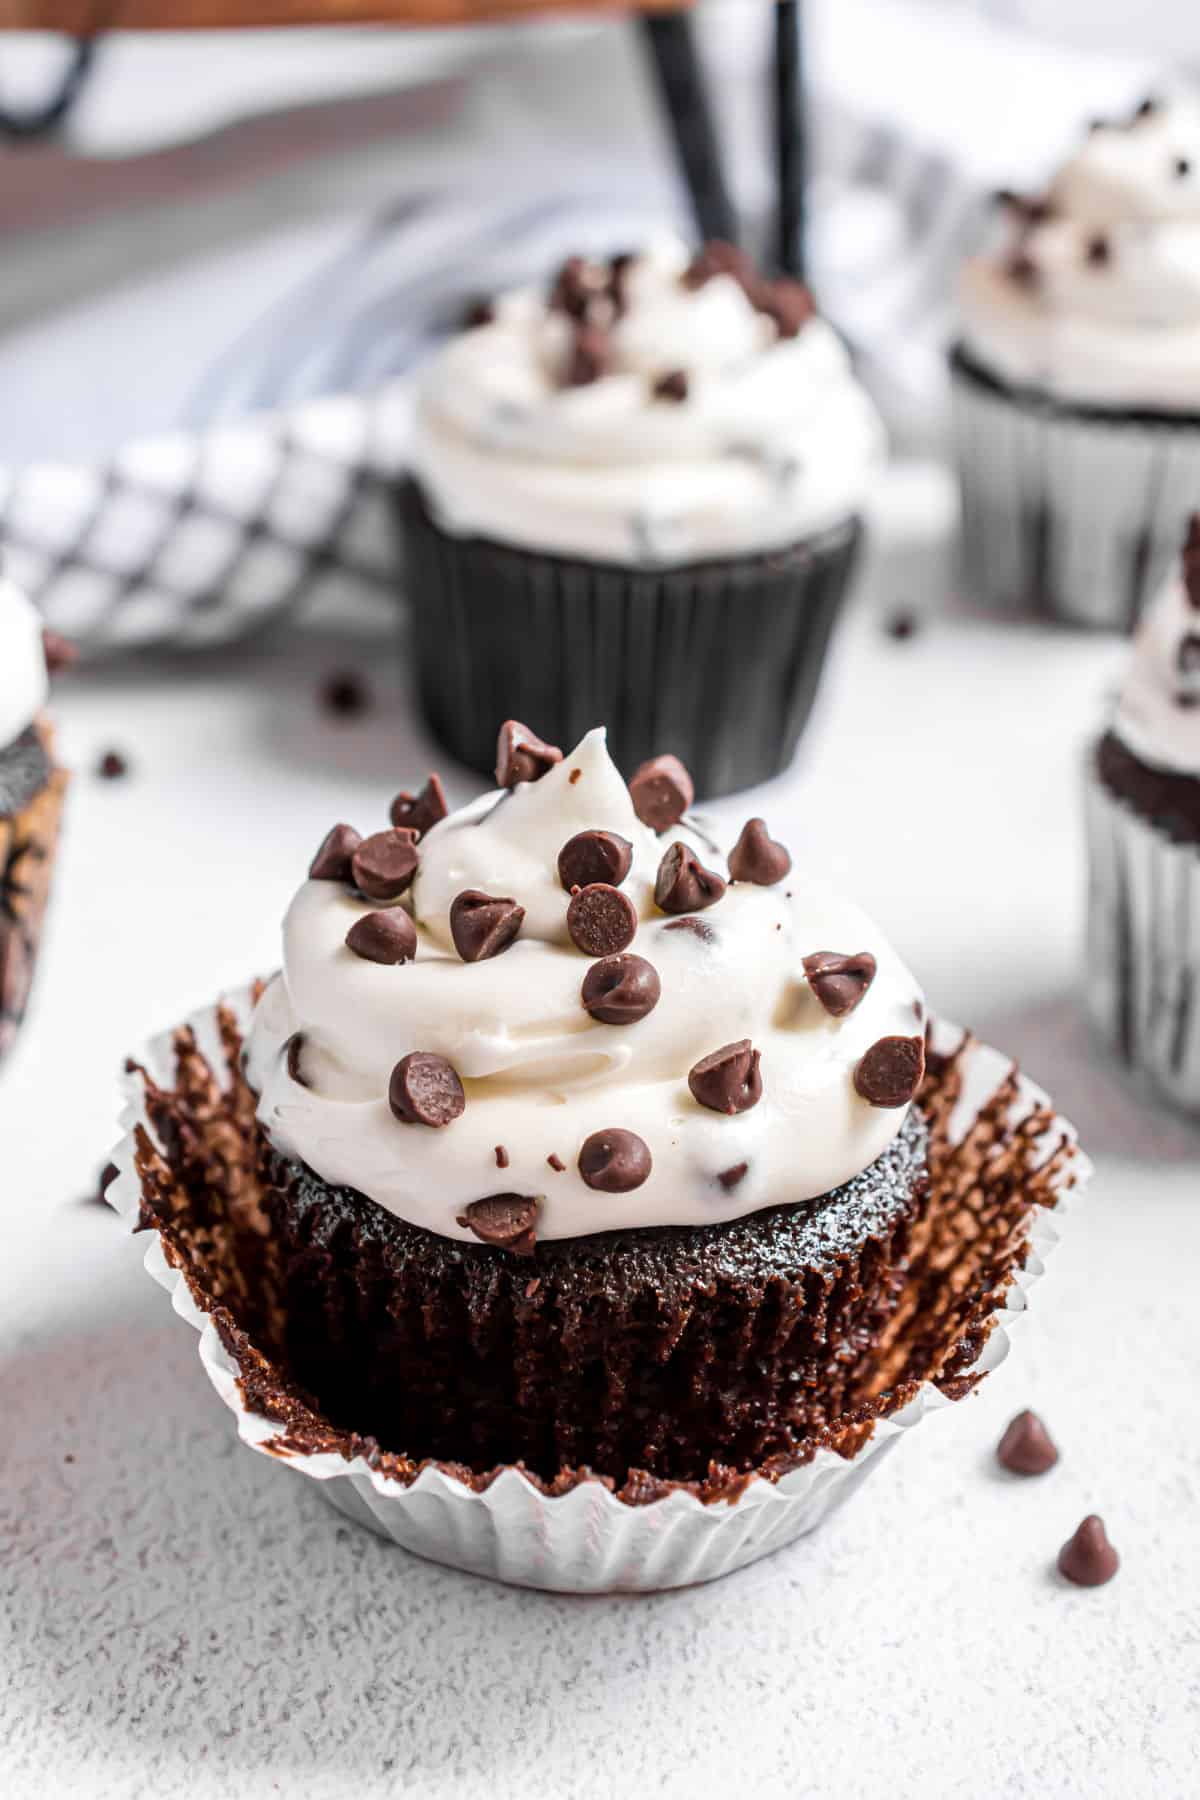 Chocolate cupcake unwrapped and topped with cream cheese frosting and mini chocolate chips.